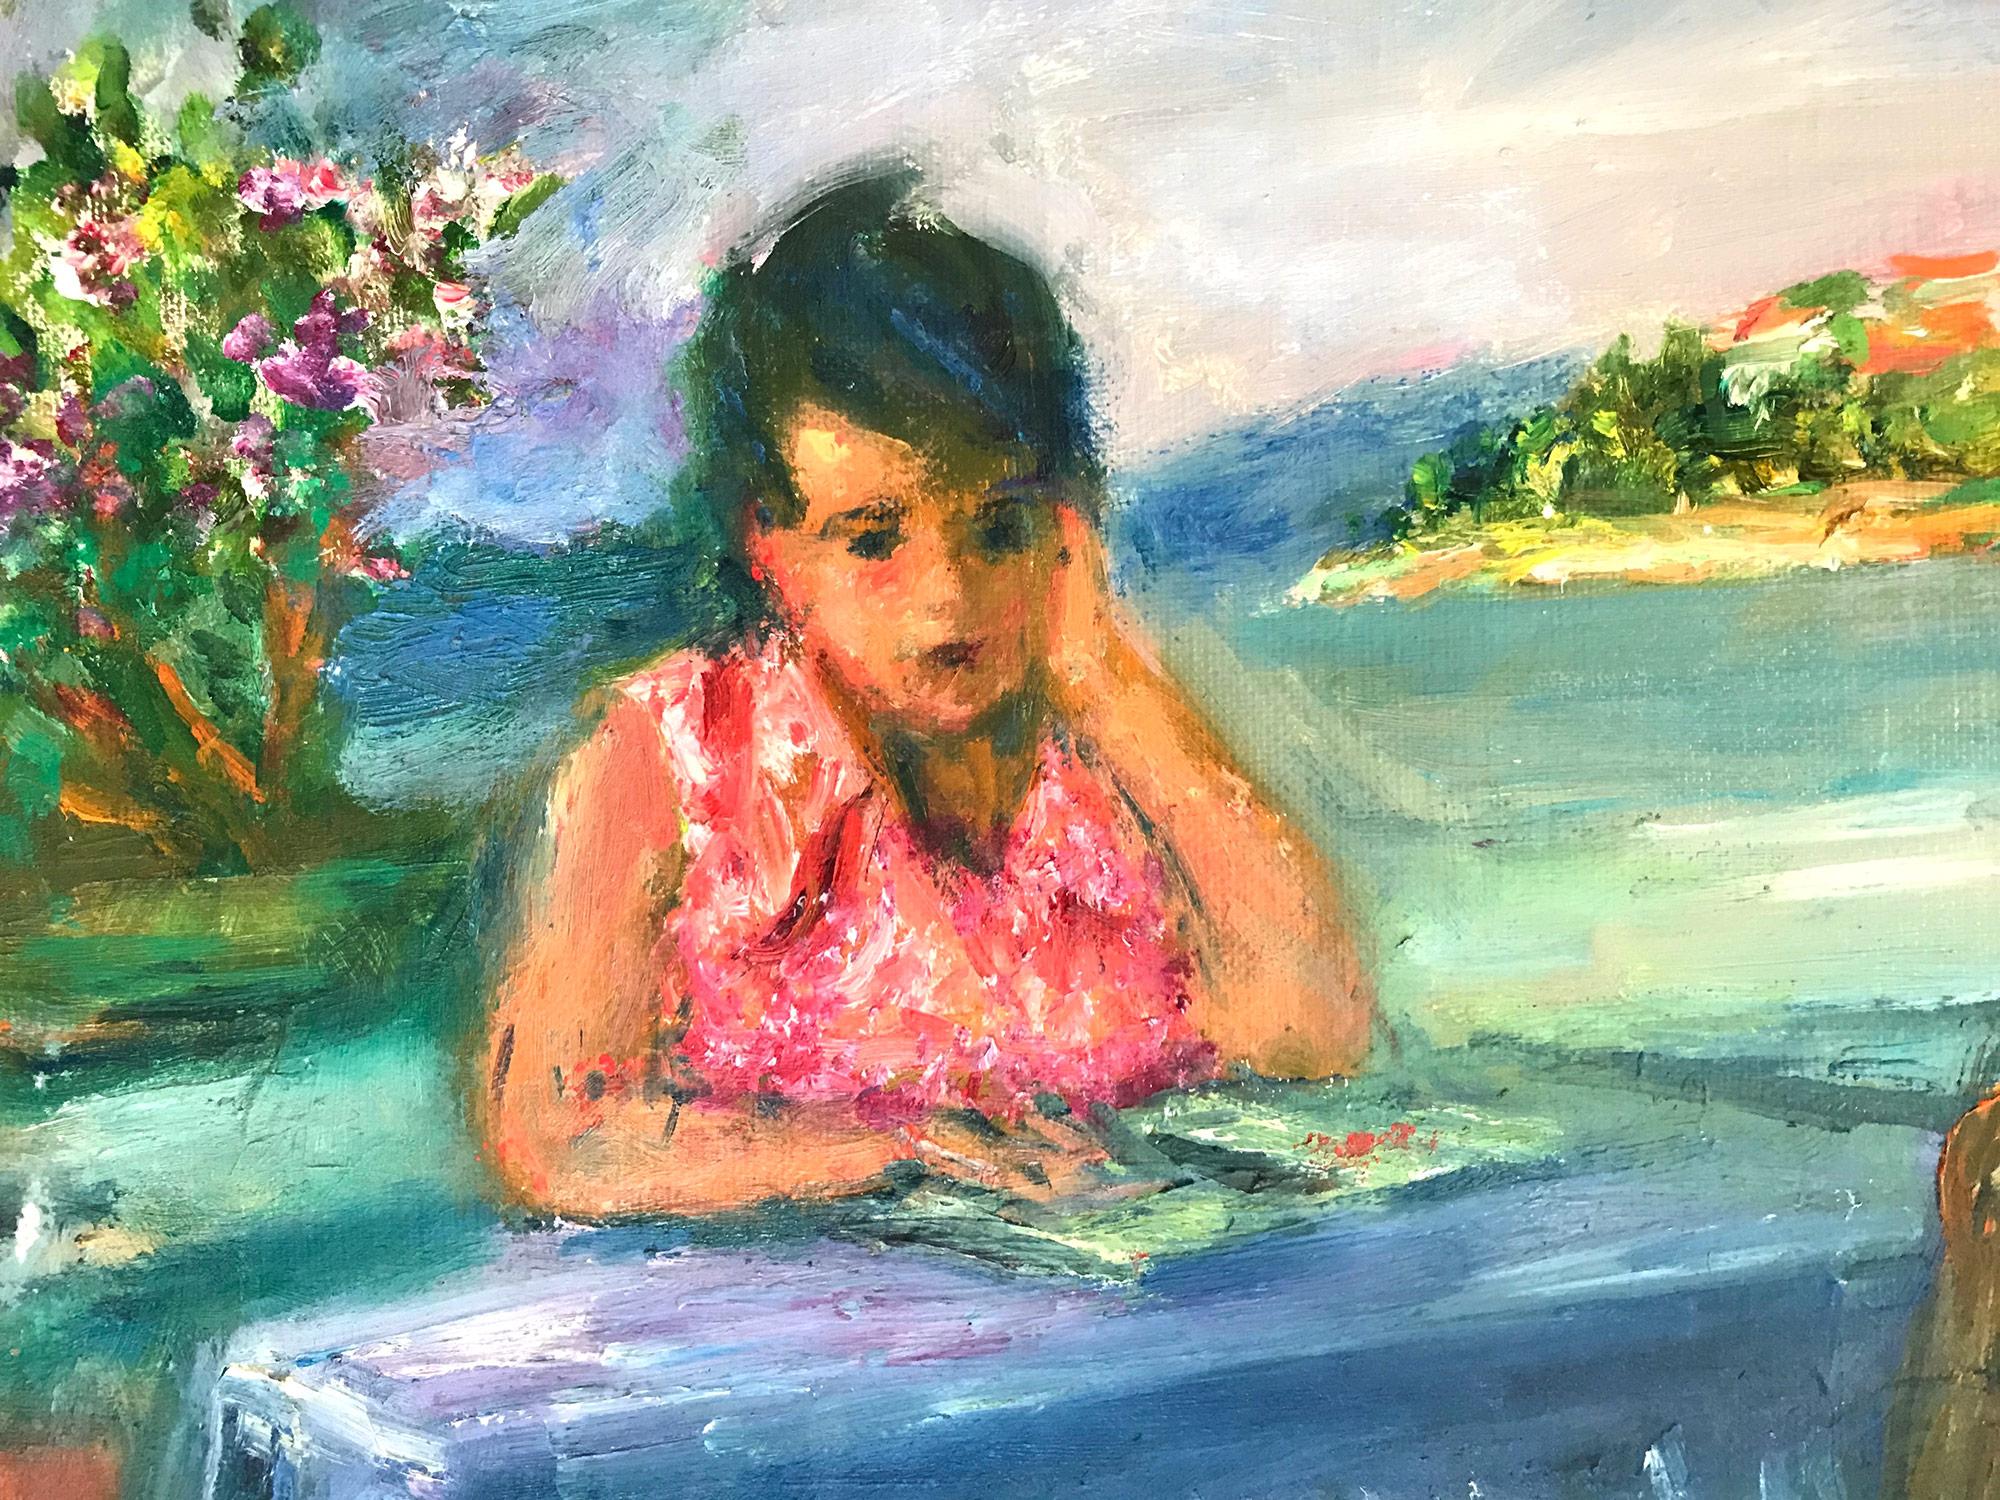 A charming painting that depicts a whimsical figure of a young girl reading at sea shore with dark hair an in the background the sea and the village houses. The bright colors and quick brush strokes are what make this painting so attractive and